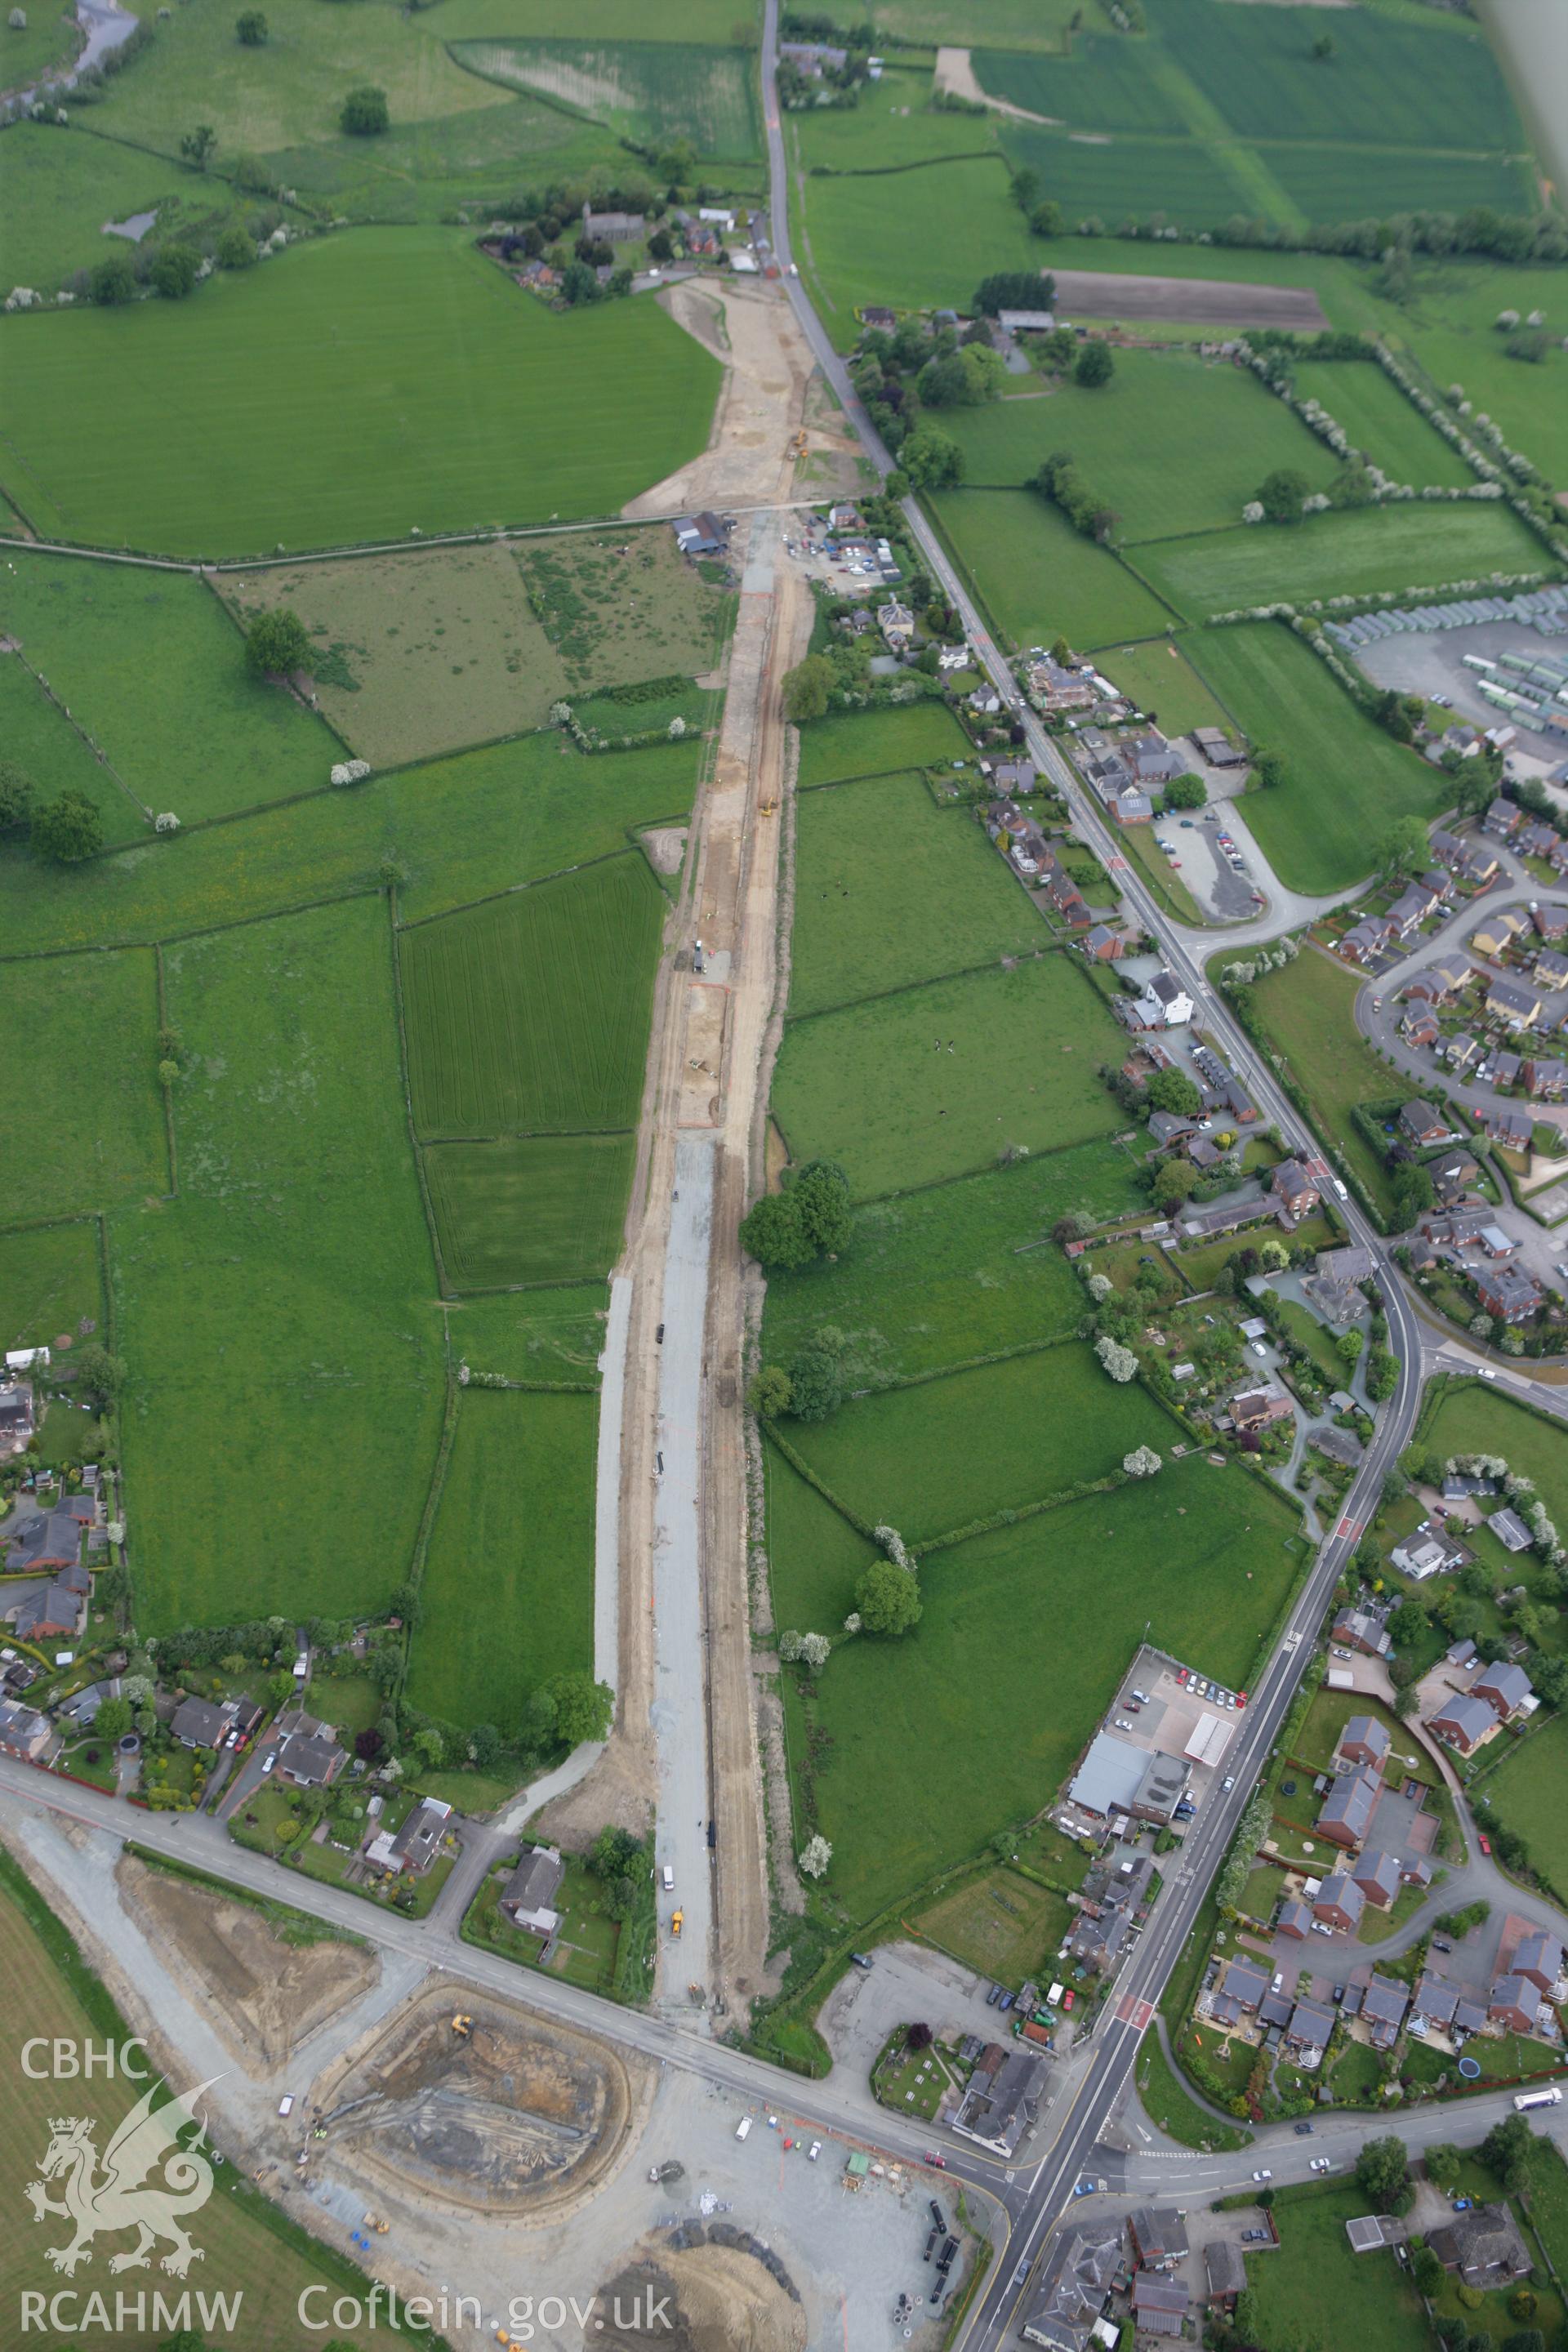 RCAHMW colour oblique photograph of Four Crosses Bypass, under construction. Taken by Toby Driver on 27/05/2010.